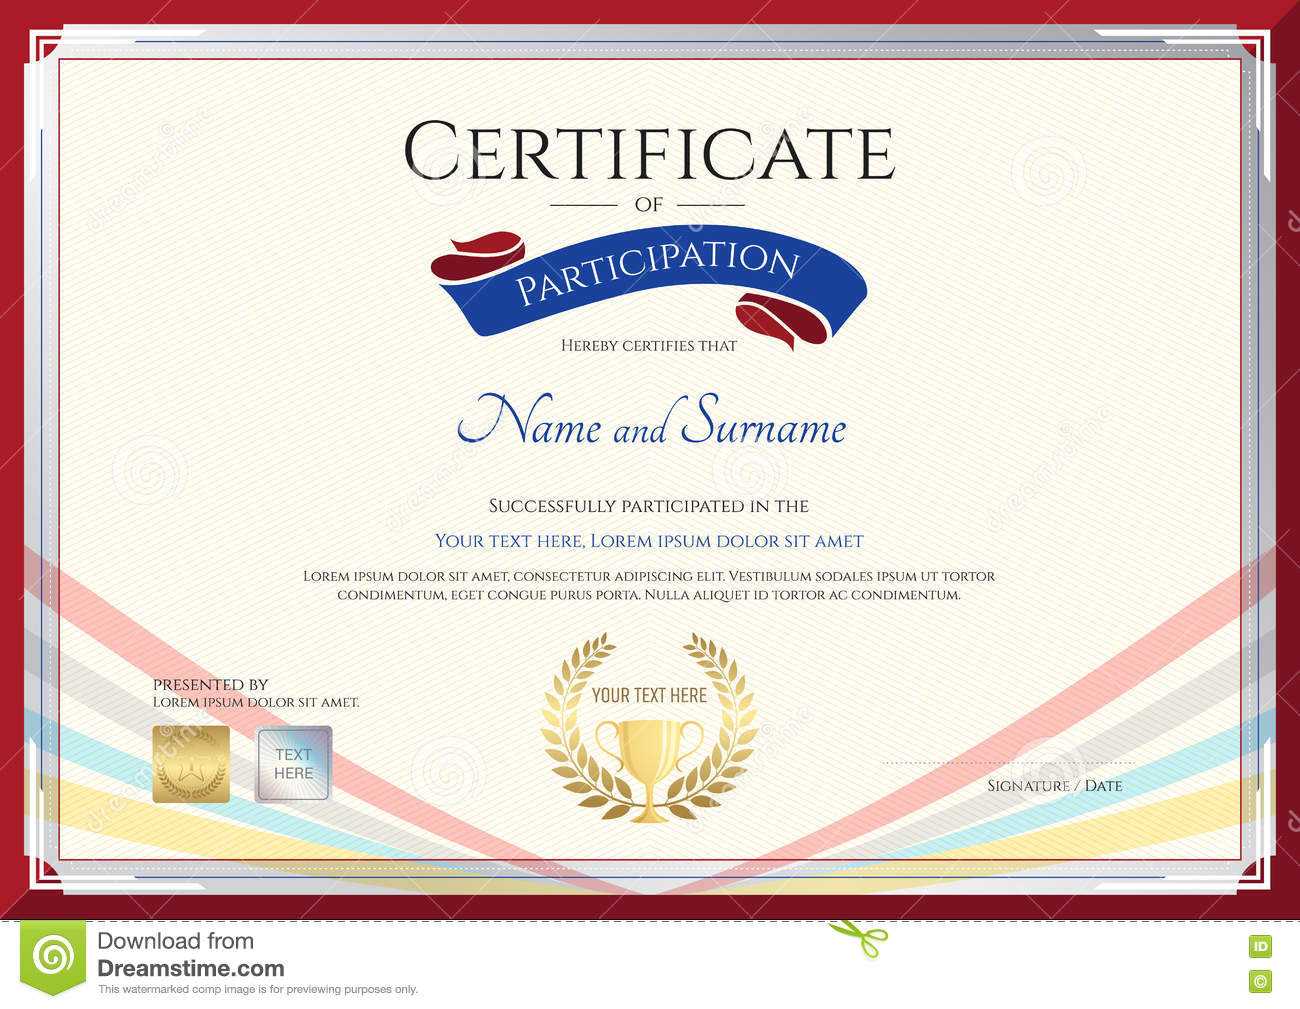 Certificate Template For Achievement, Appreciation Or With Regard To Conference Participation Certificate Template